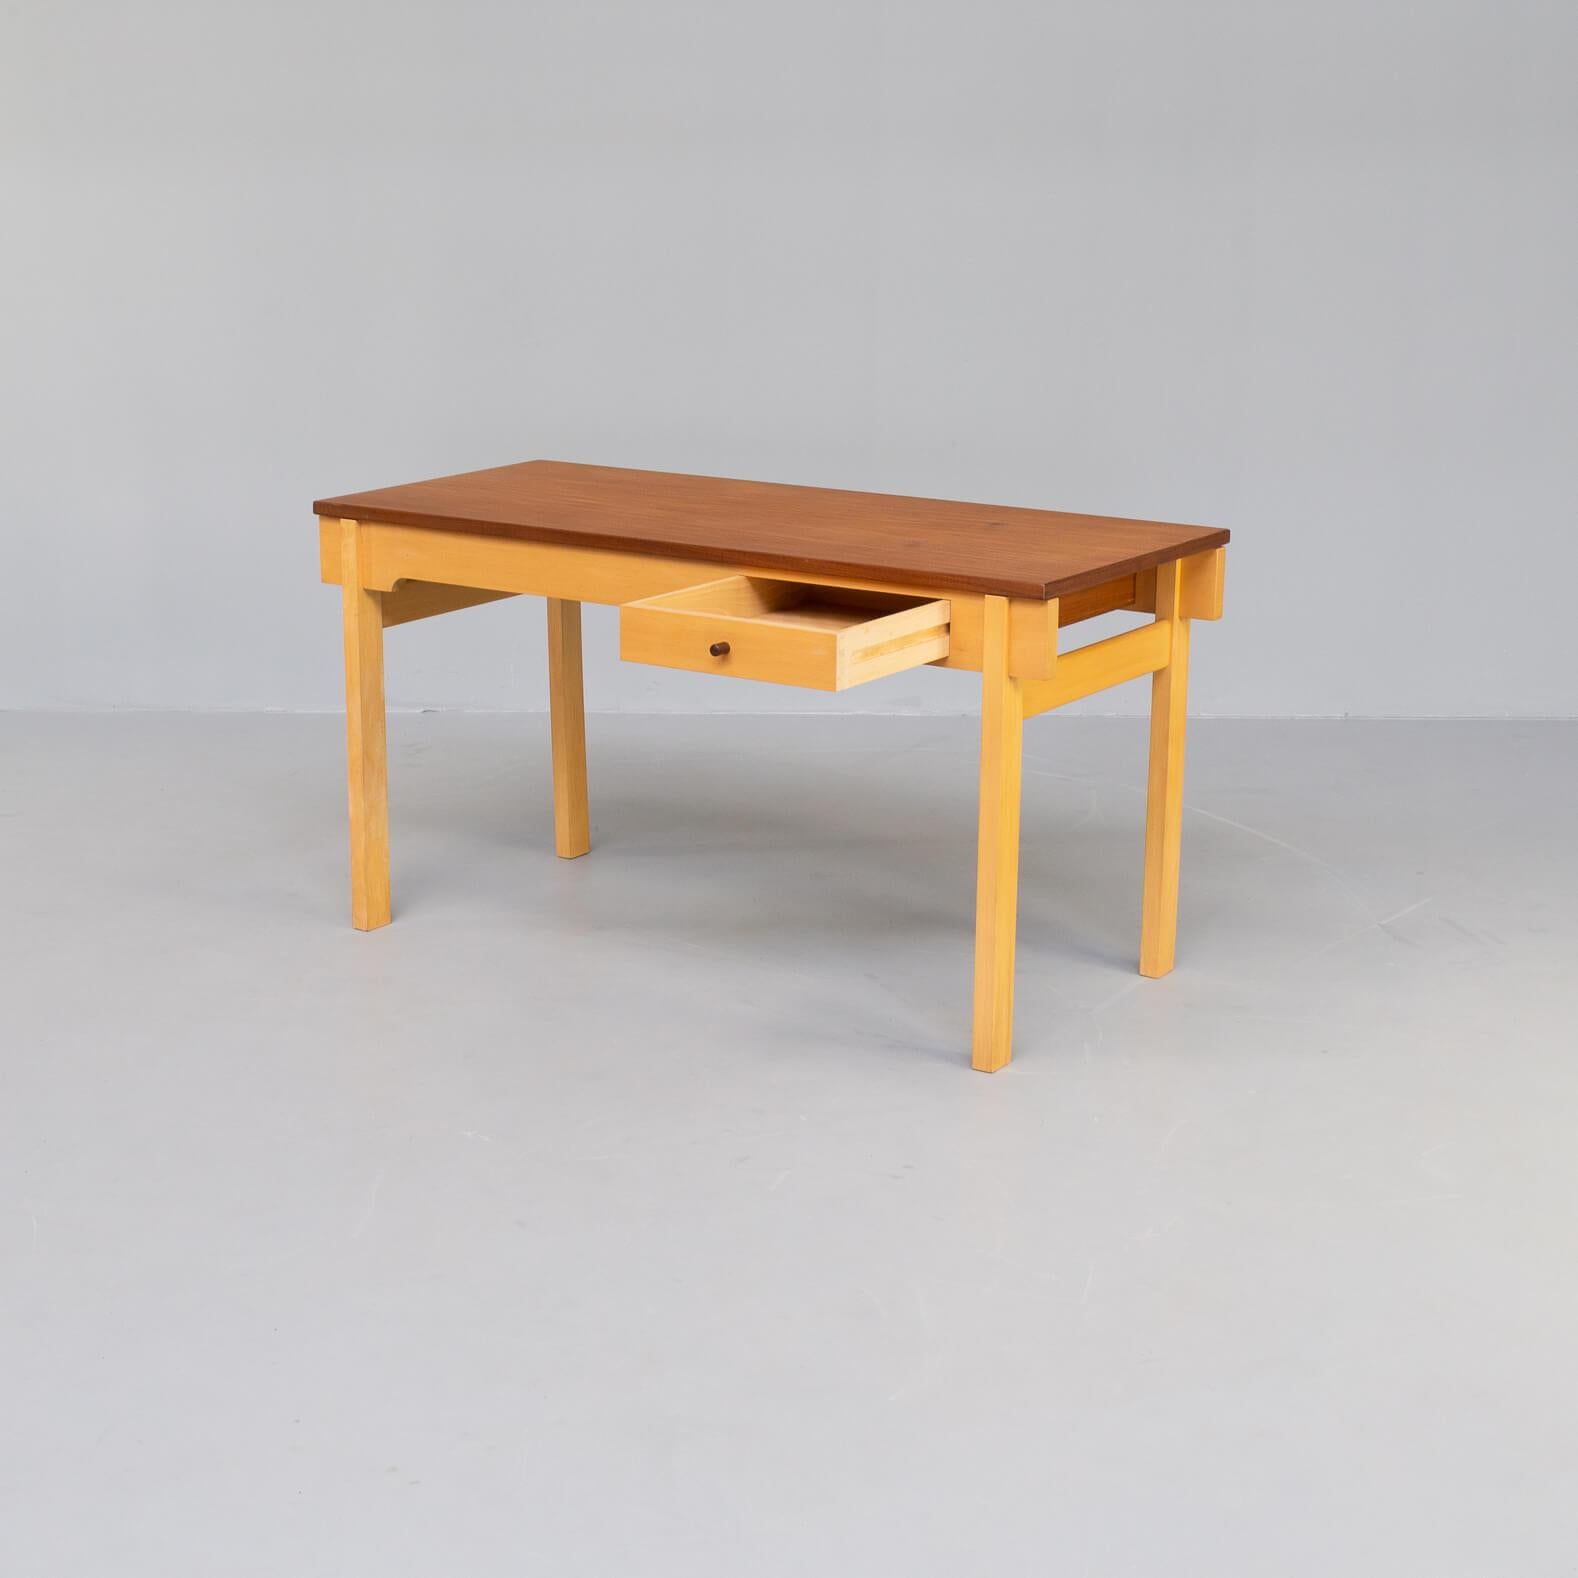 Beautiful teak and oak wooden table or desktable designed in the sixties for Andreas Tuck by a Dannish designer Hans J. Wegner. Andreas Tuck was the furniture producer that made the modern Danish furniture design known worldwide by its cooperation